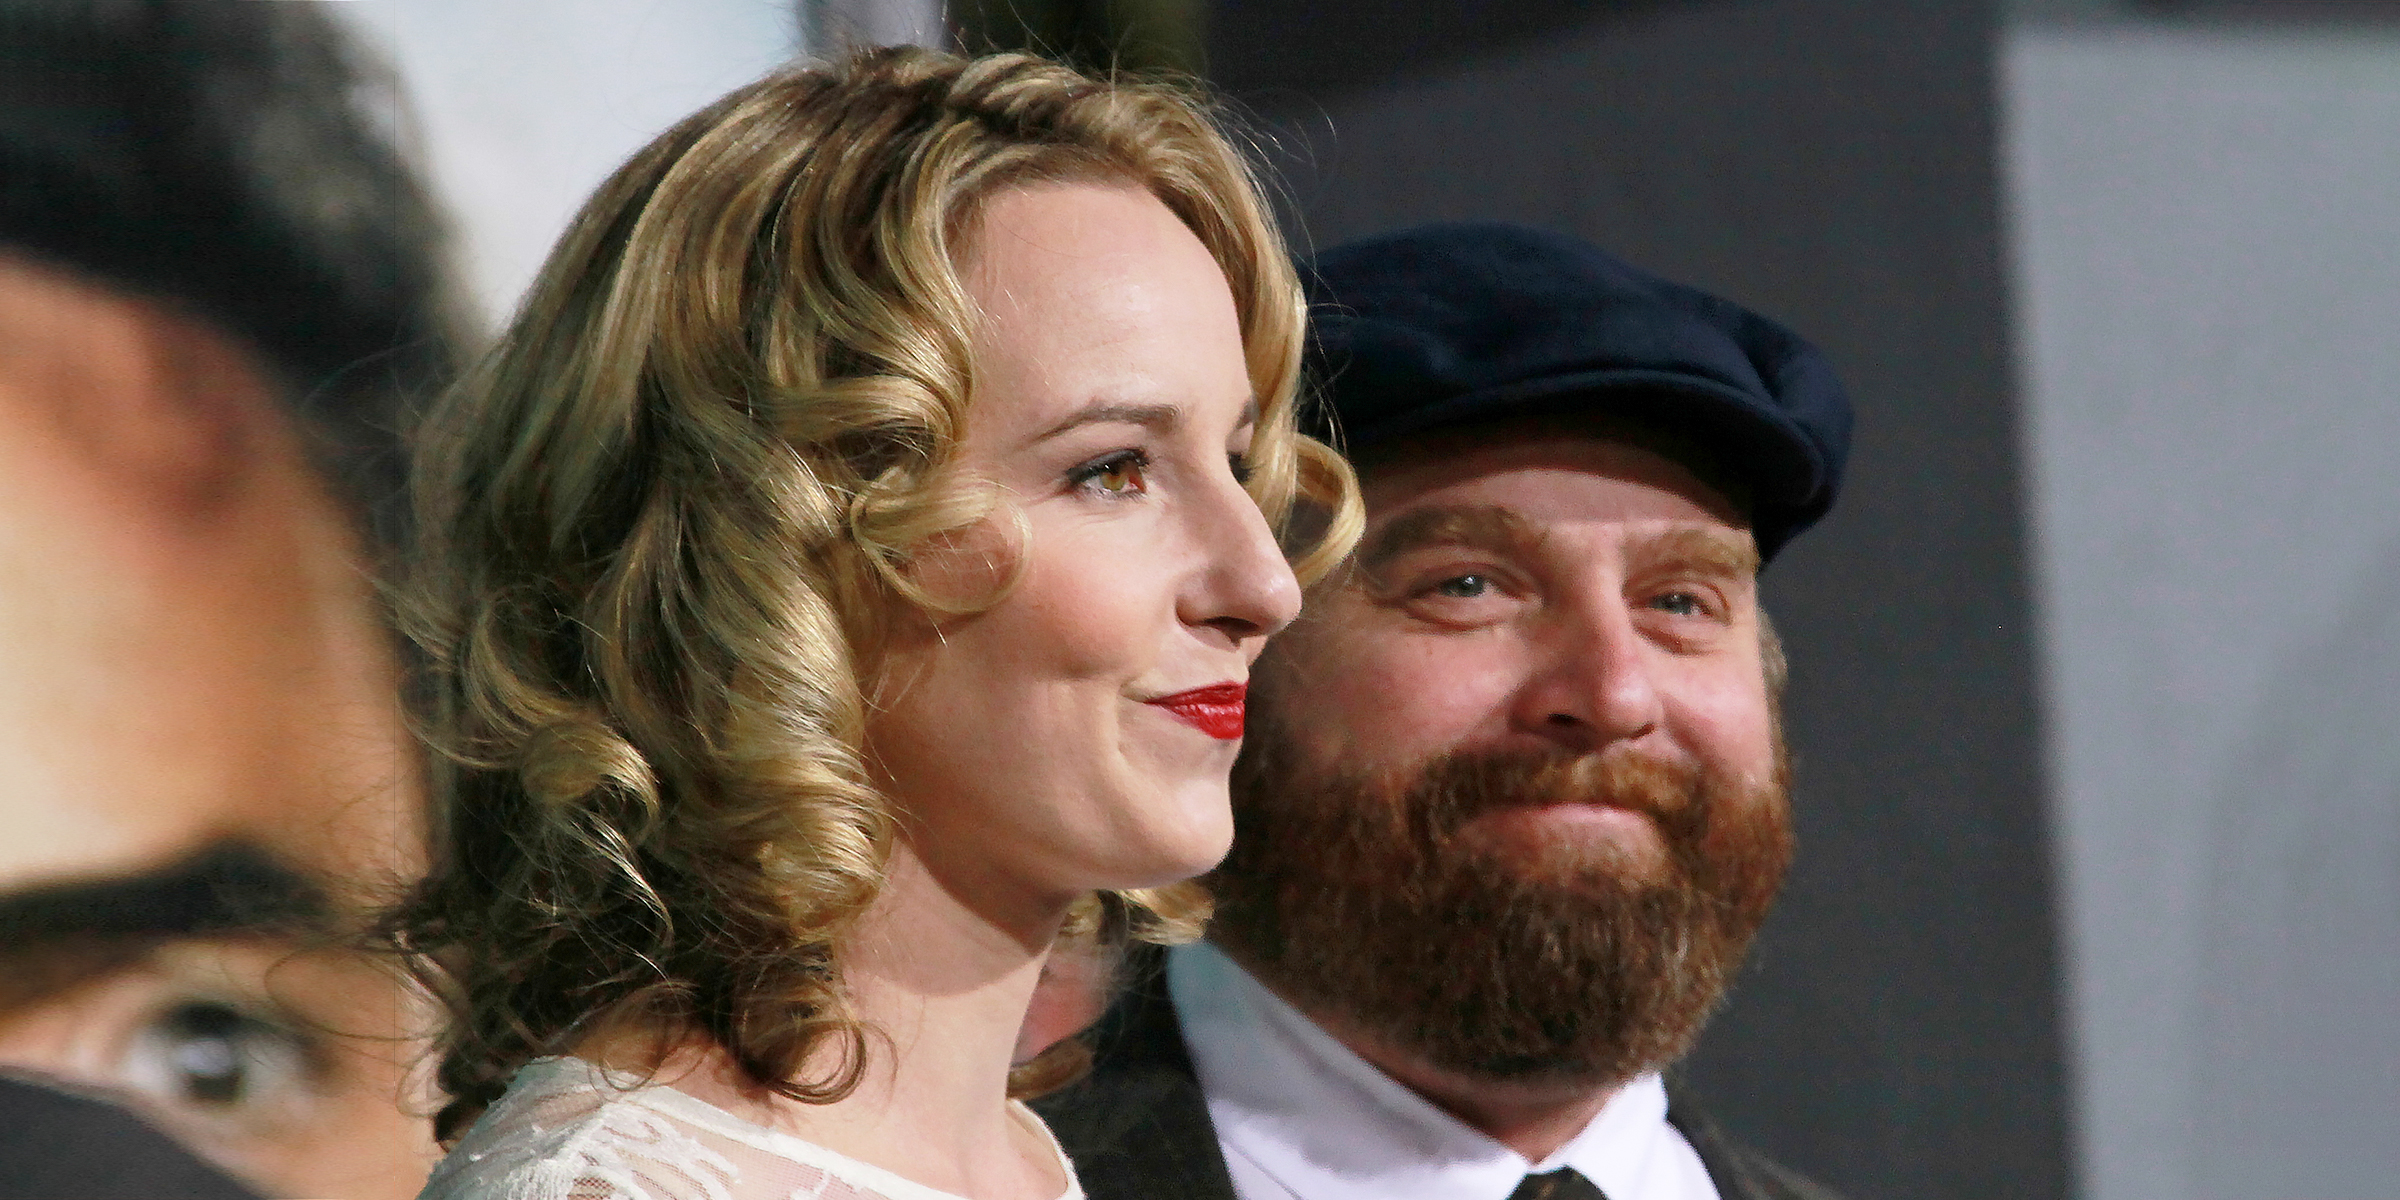 Quinn Lundberg and Zach Galifianakis | Source: Getty Images